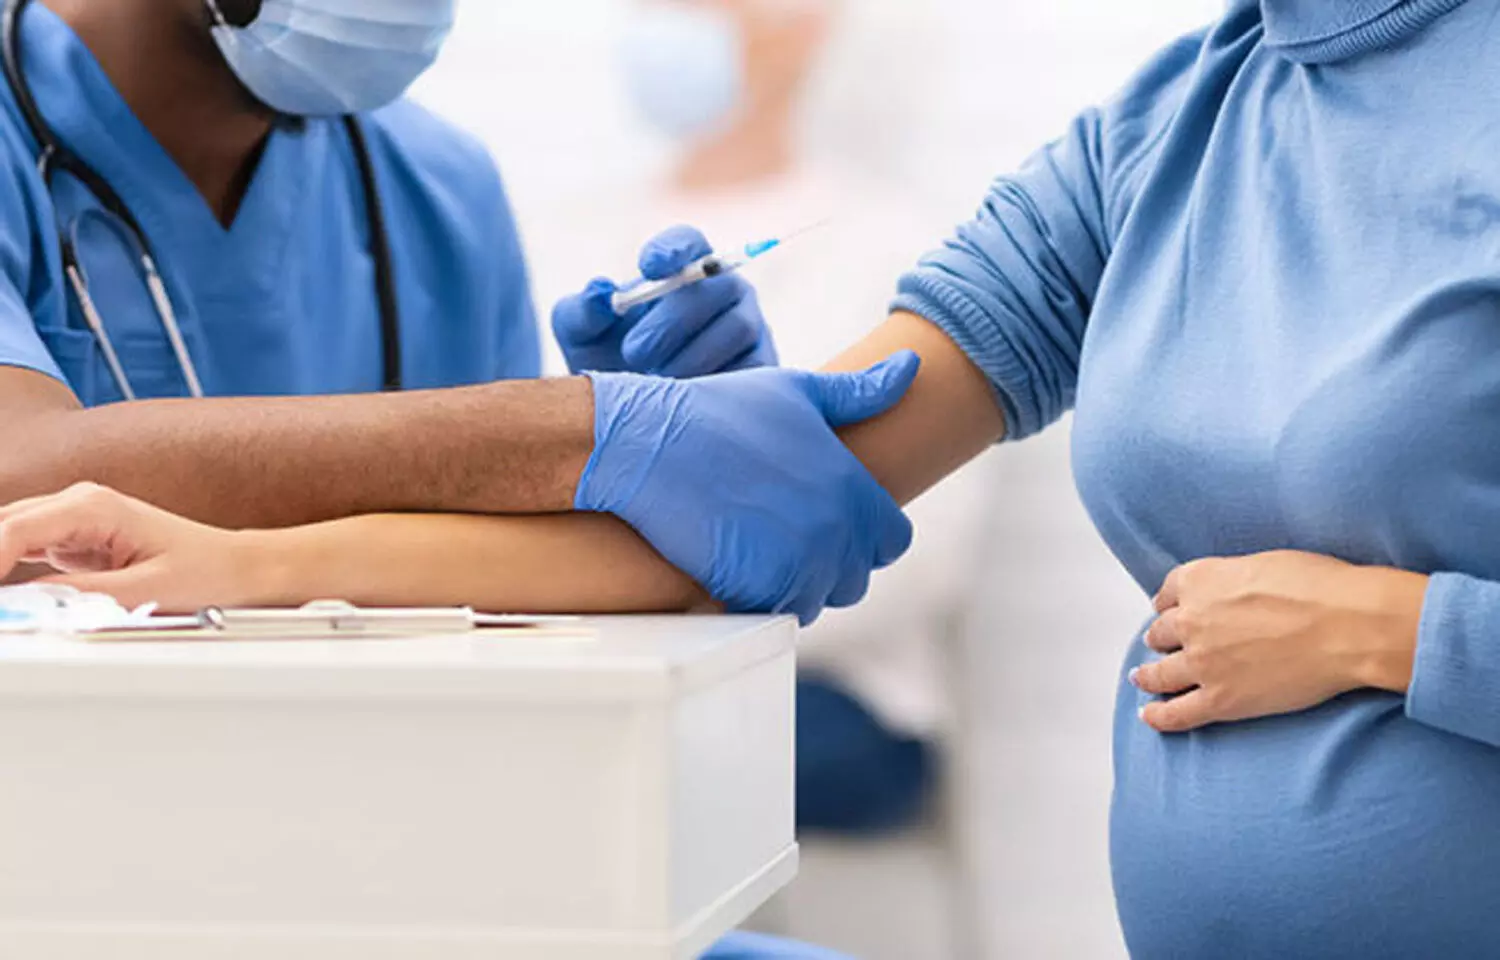 ACOG and SMFM recommends all pregnant women to get COVID-19 vaccination